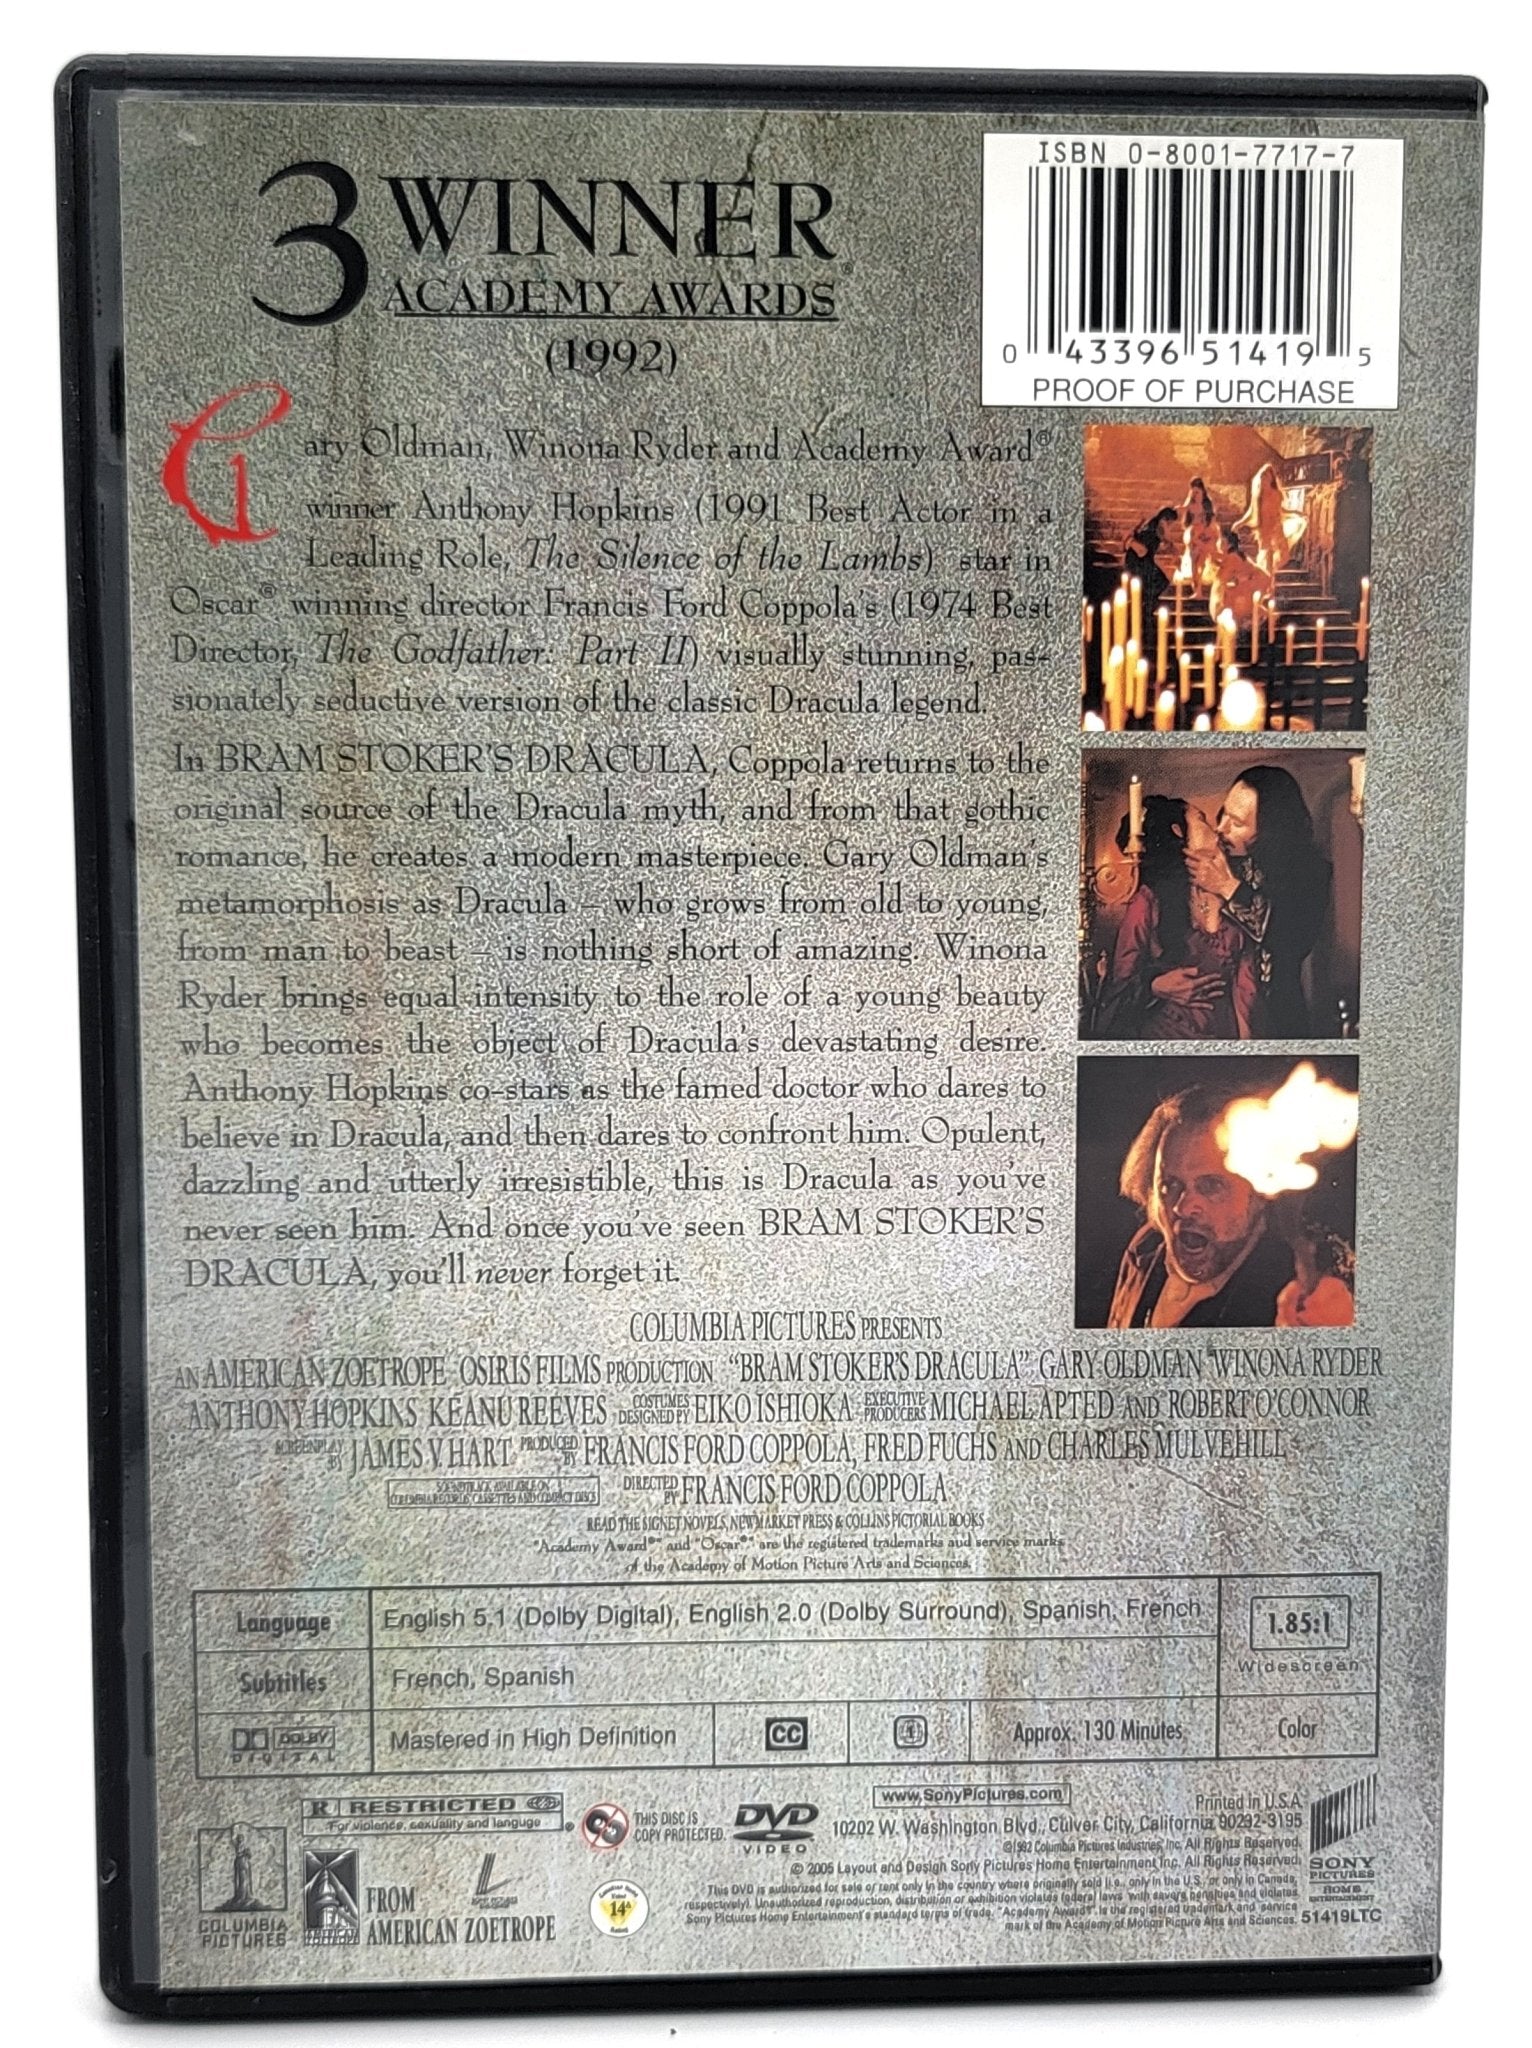 Columbia Pictures - Dracula - Bram Stoker's | DVD | A Francis Ford Coppola Film | Widescreen - DVD - Steady Bunny Shop